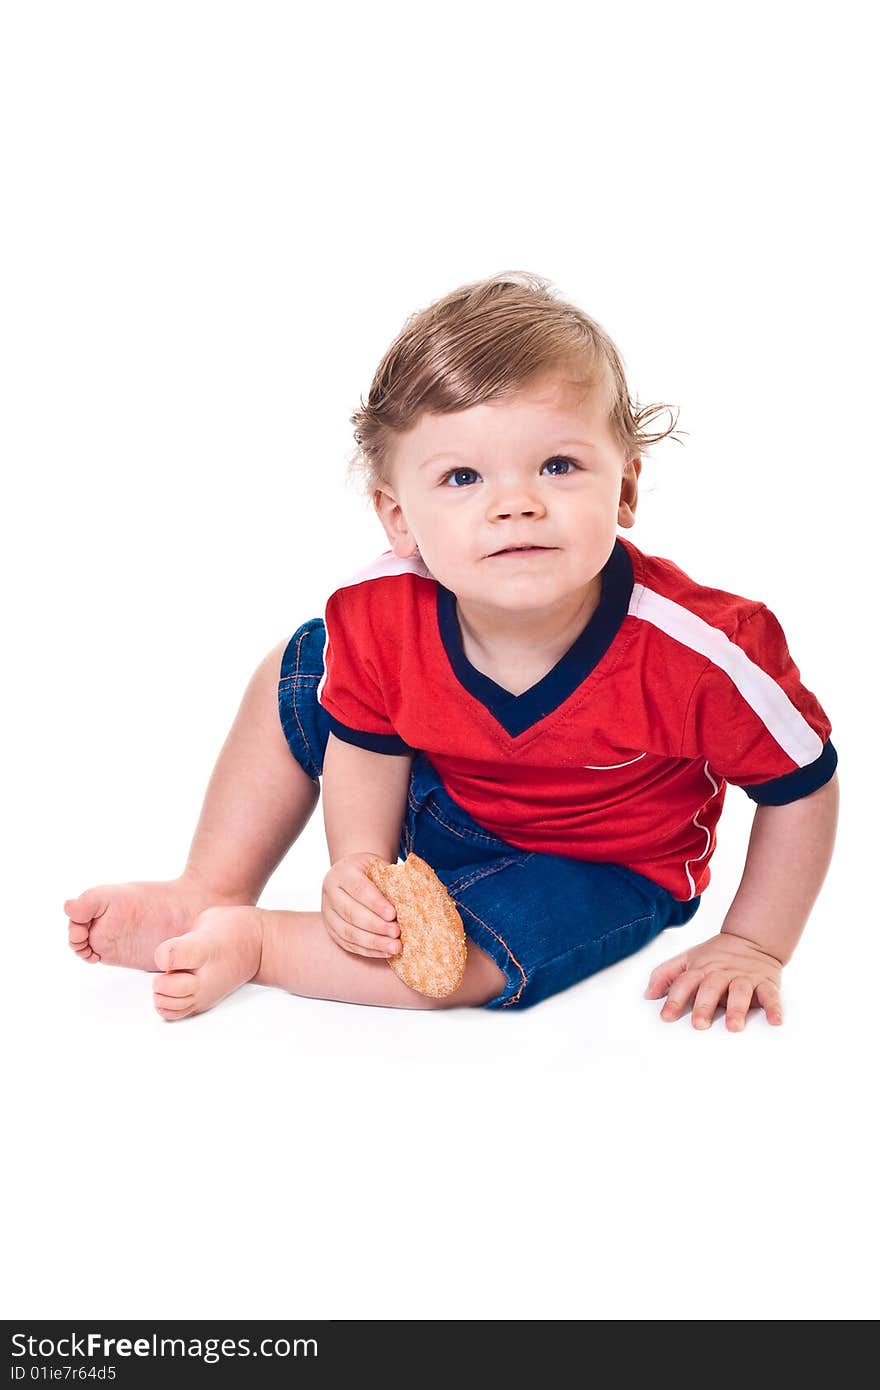 Curious baby crawls with cookies in hand on white background